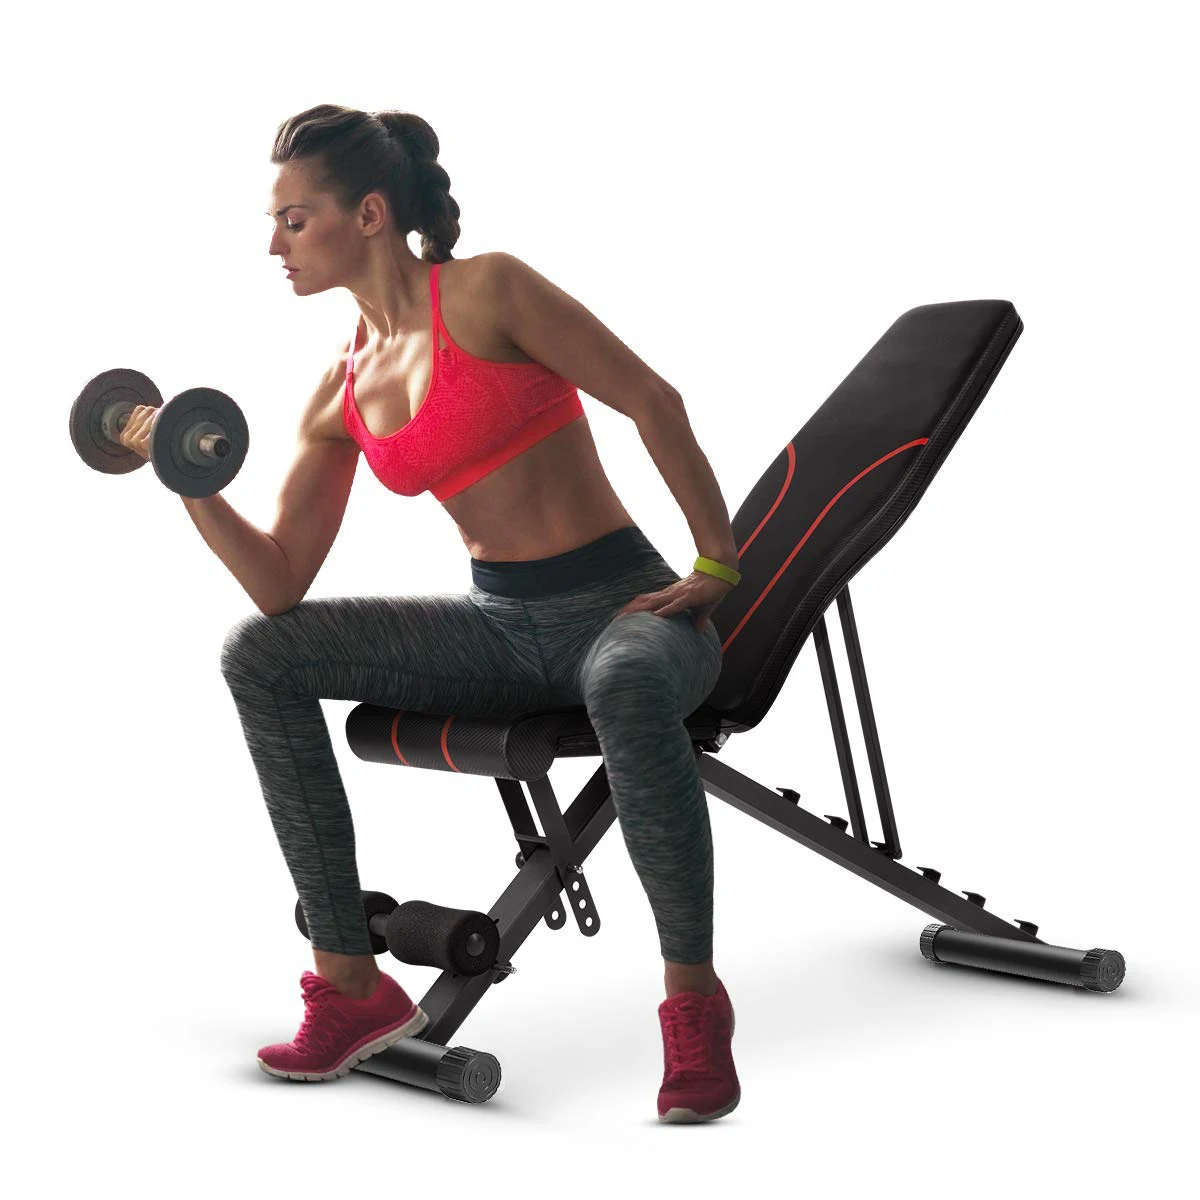 Lady doing exercise on a bench press